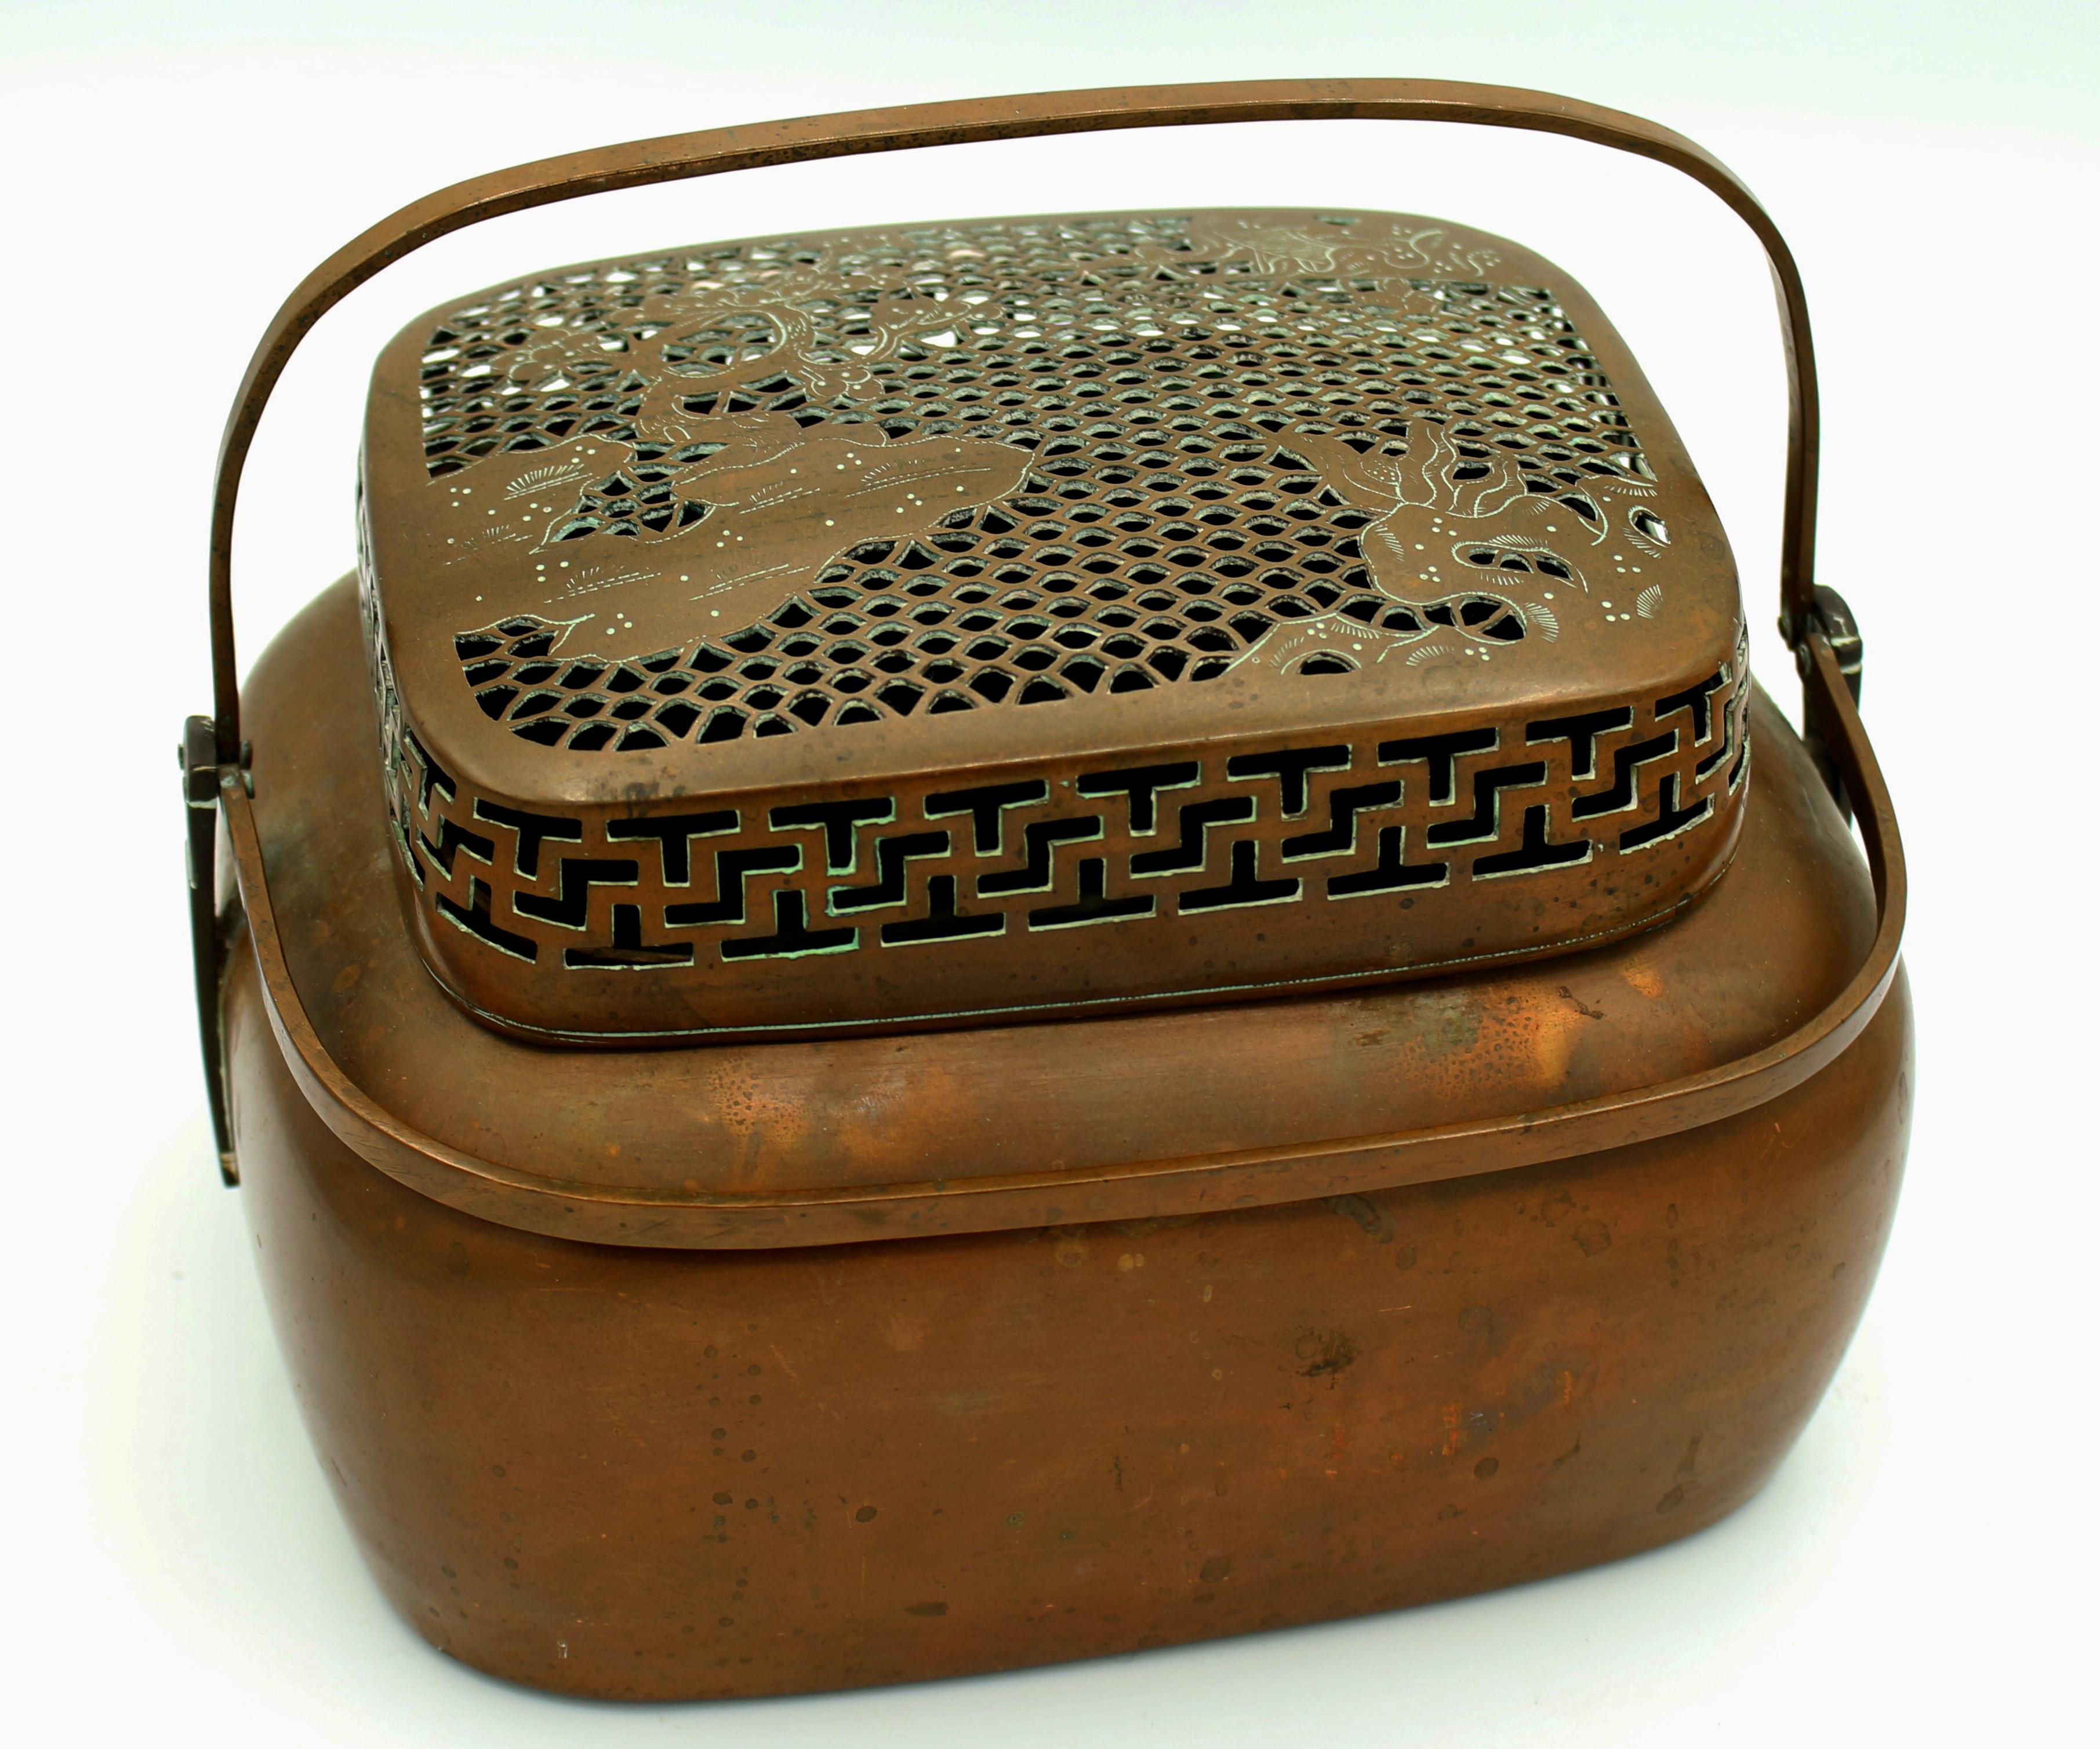 A fine 19th century Chinese cricket box basket. Copper with double swing handles. The cutwork top with Greek key motif border and top panel with landscape featuring a cherry blossom tree. A charming piece! Also useful for potpourri, yarn, etc. etc.